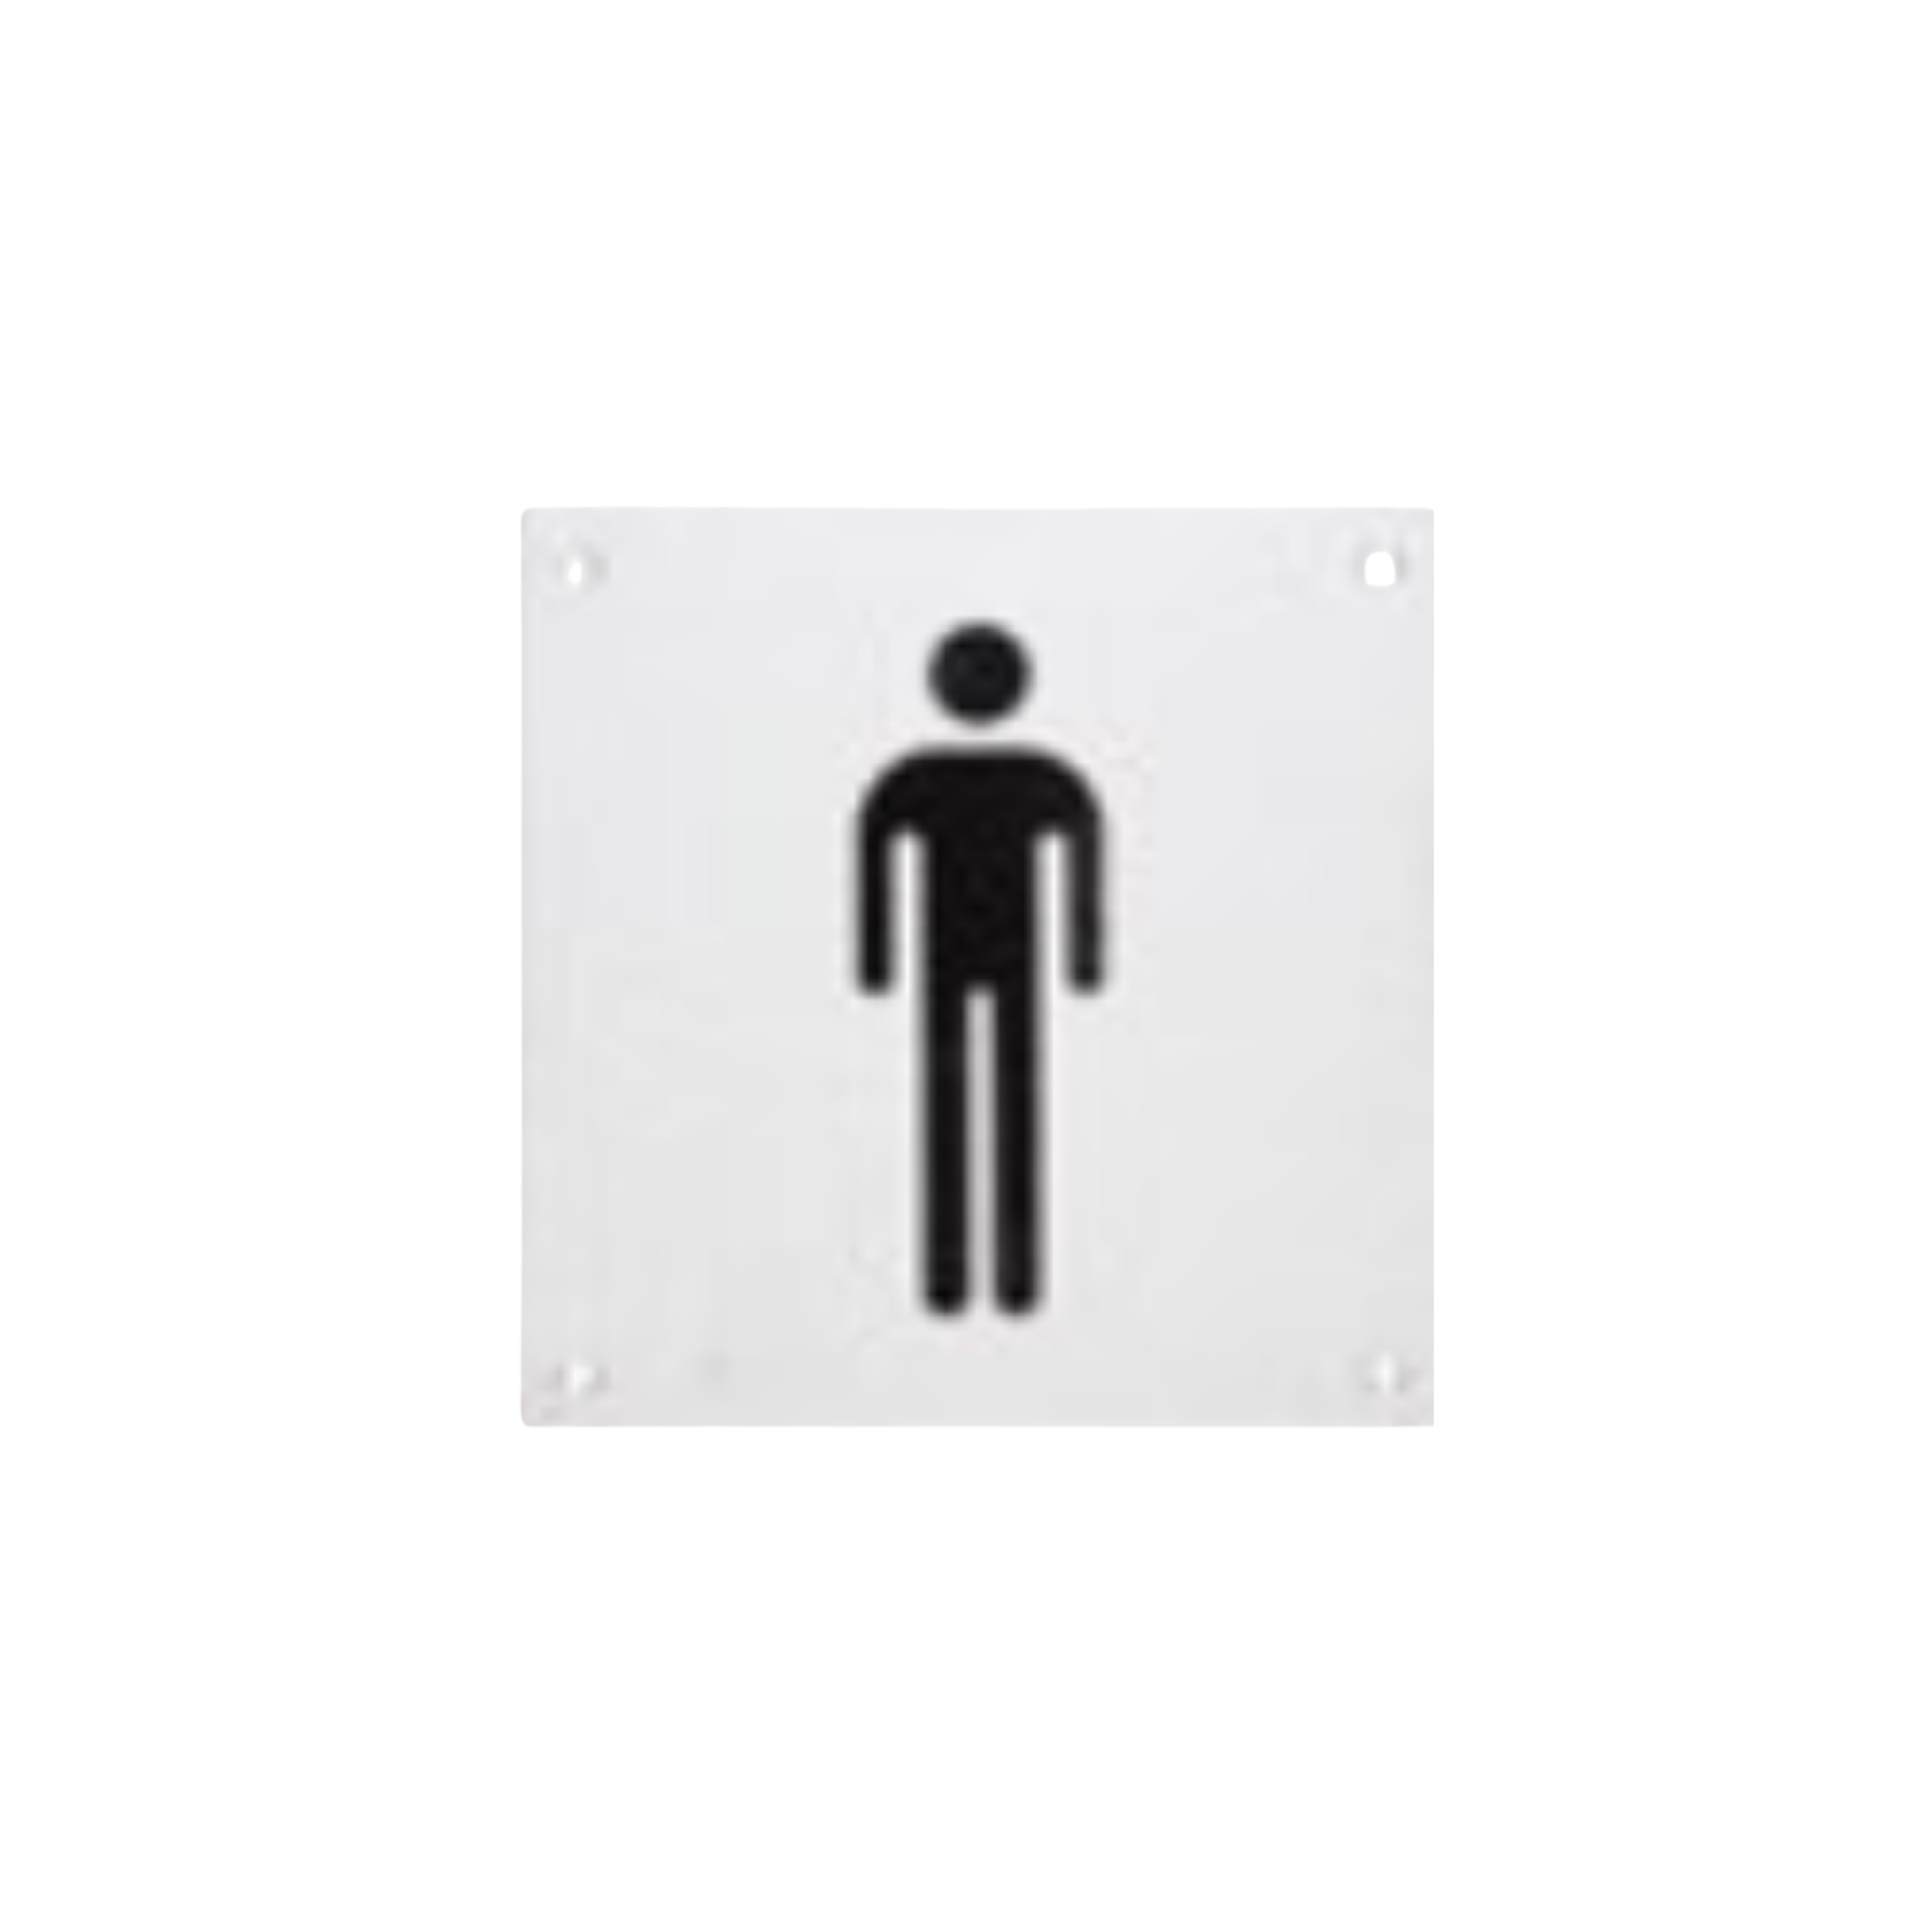 DSS-130, Door Signage, Male sign, 150mm (l), 150mm (w), 1,2mm (t), Stainless Steel, DORMAKABA